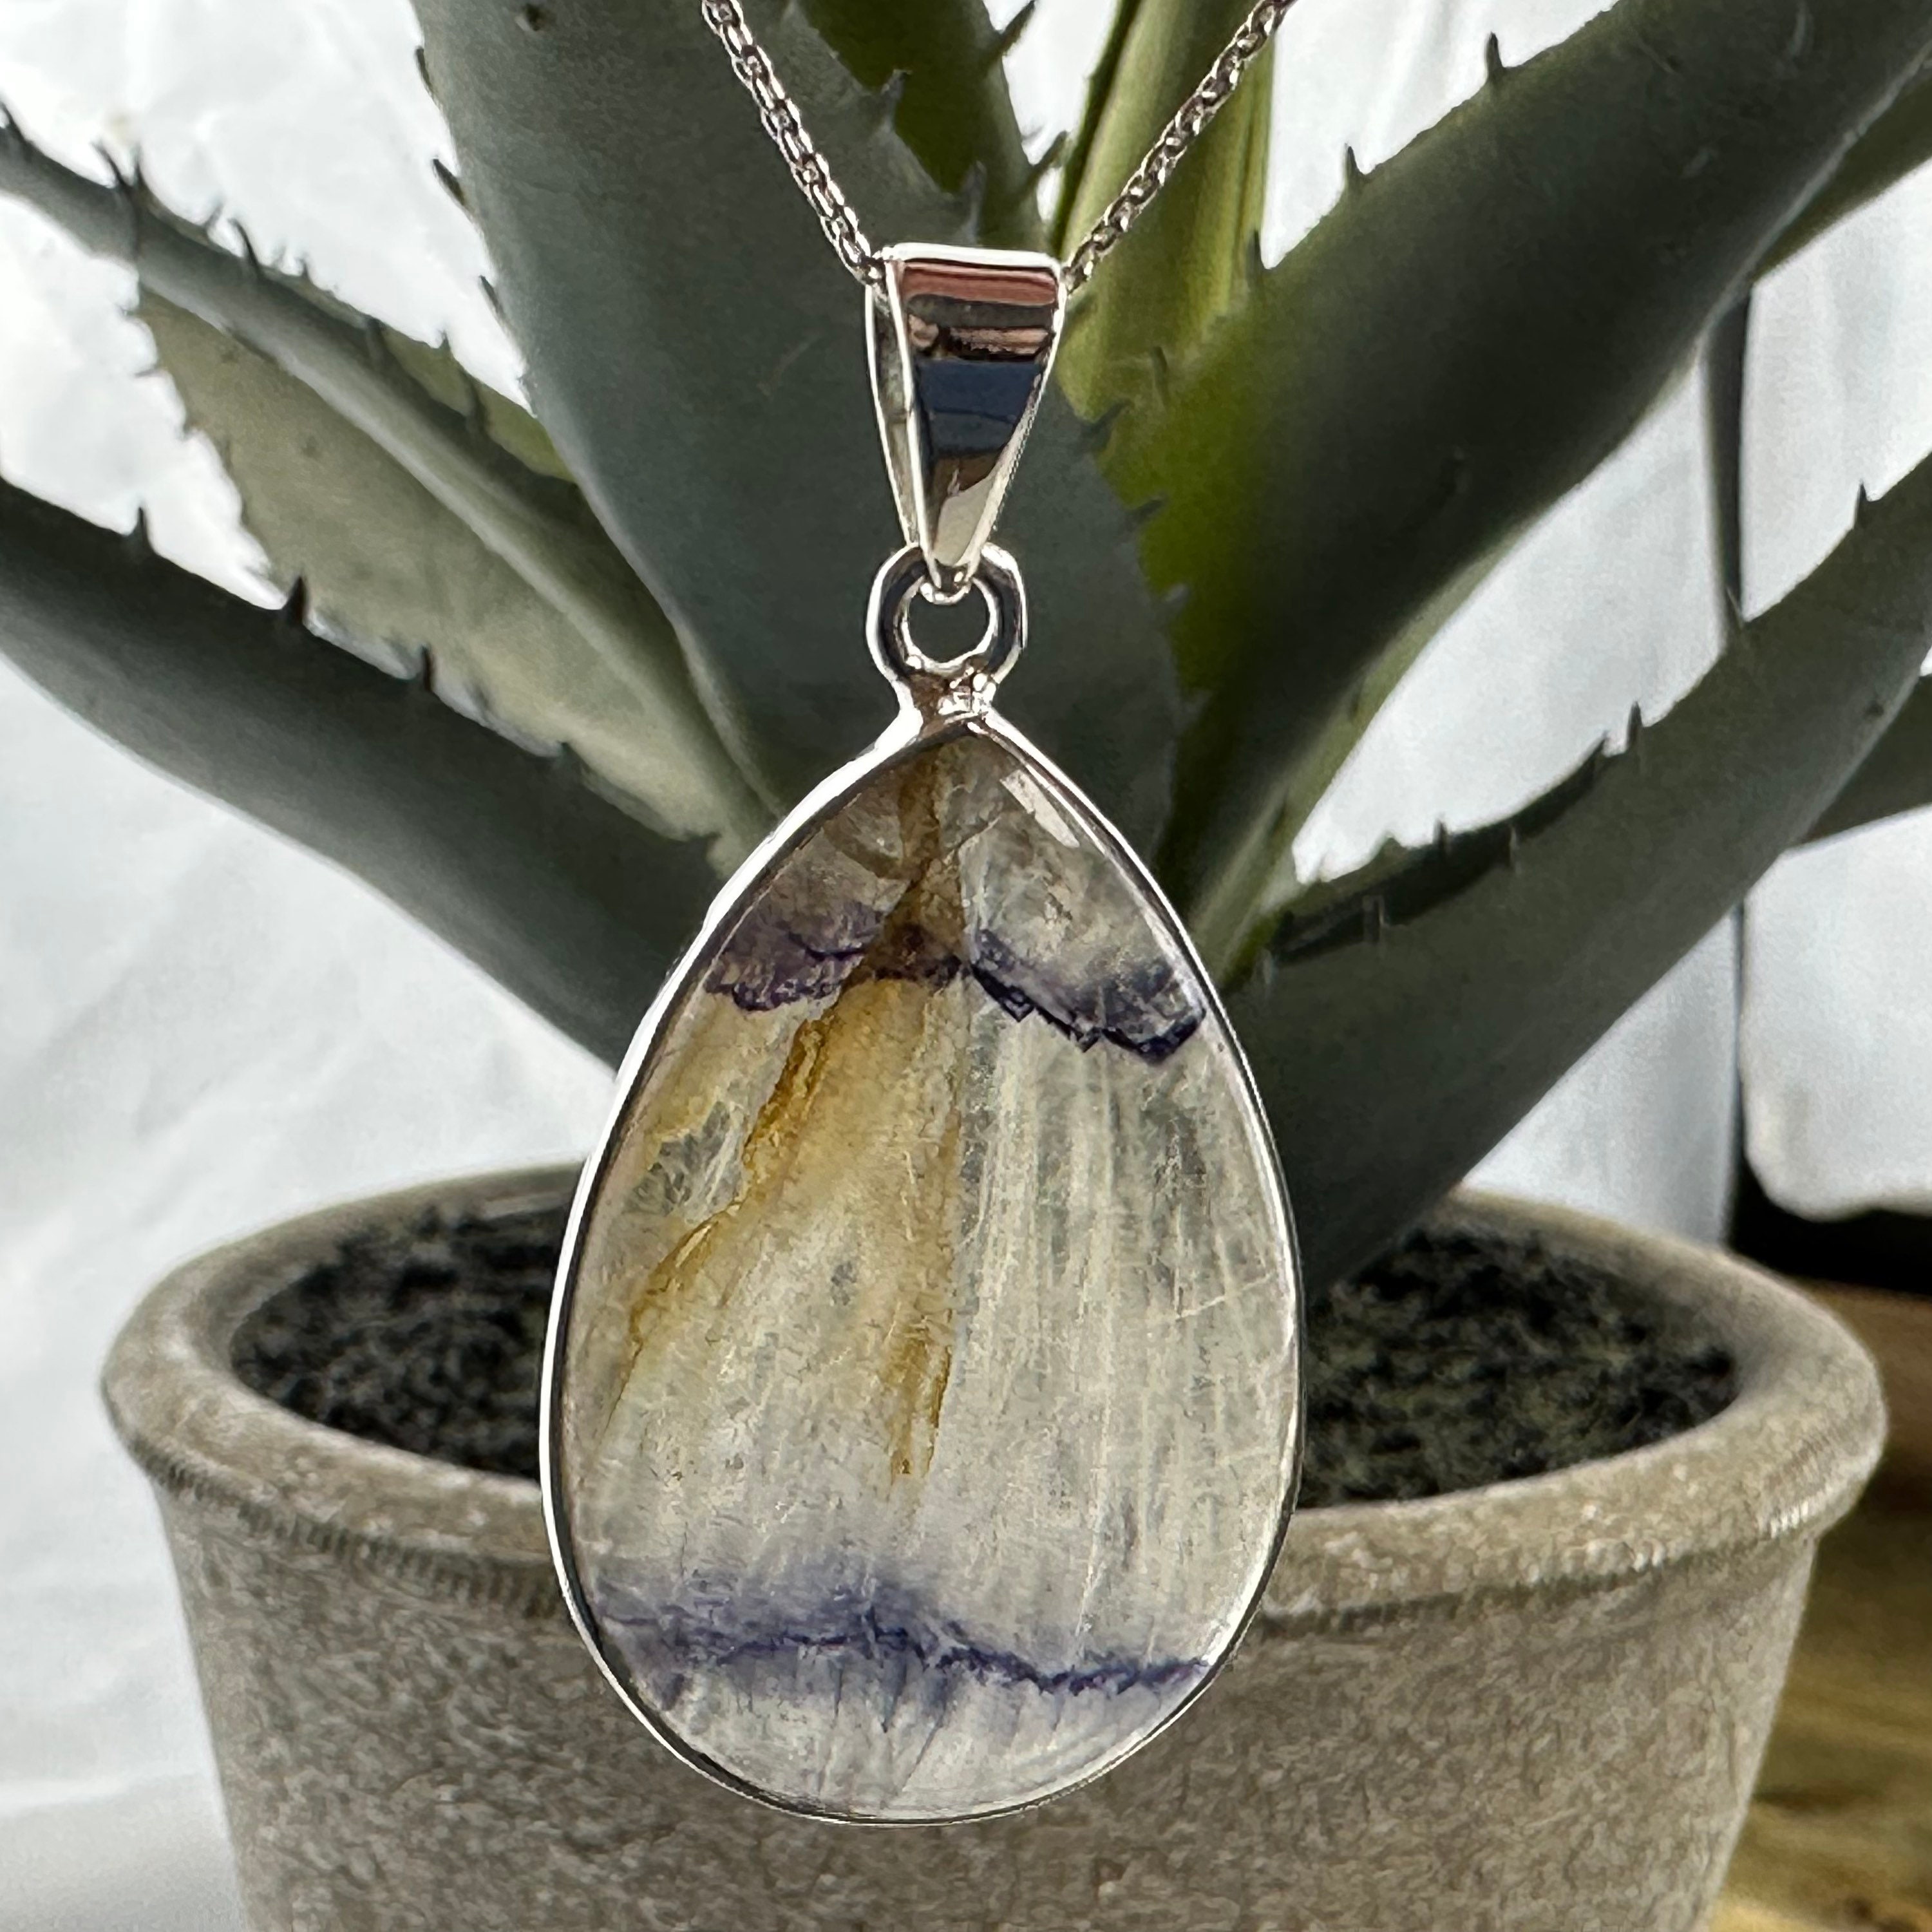 Blue John Pendant and Chain Sterling Silver Large Oval Reversible | eBay